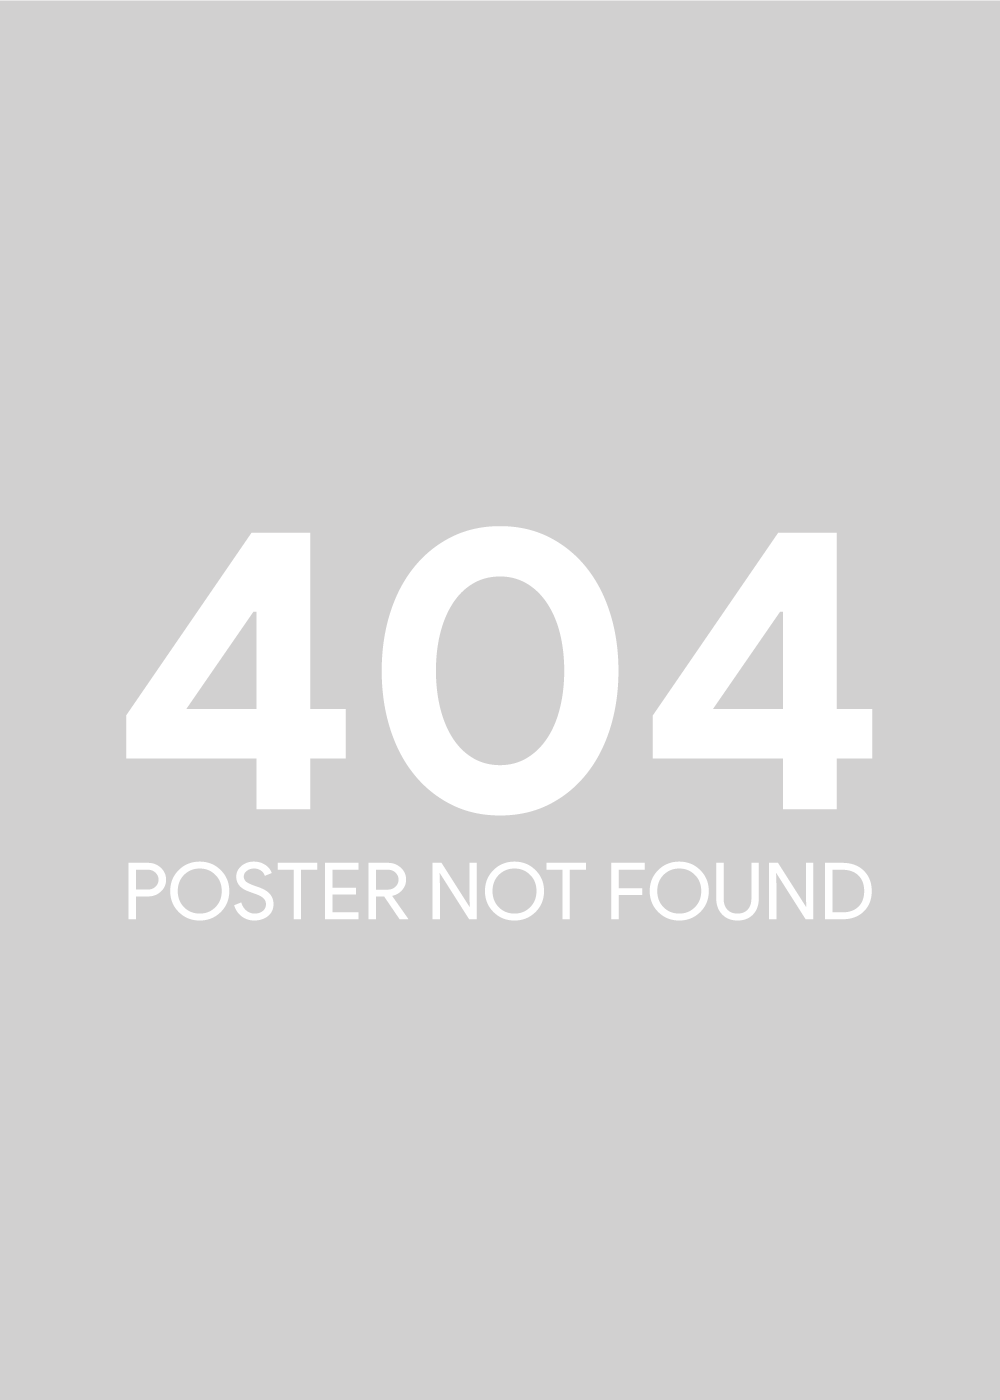 404 poster not found plakat